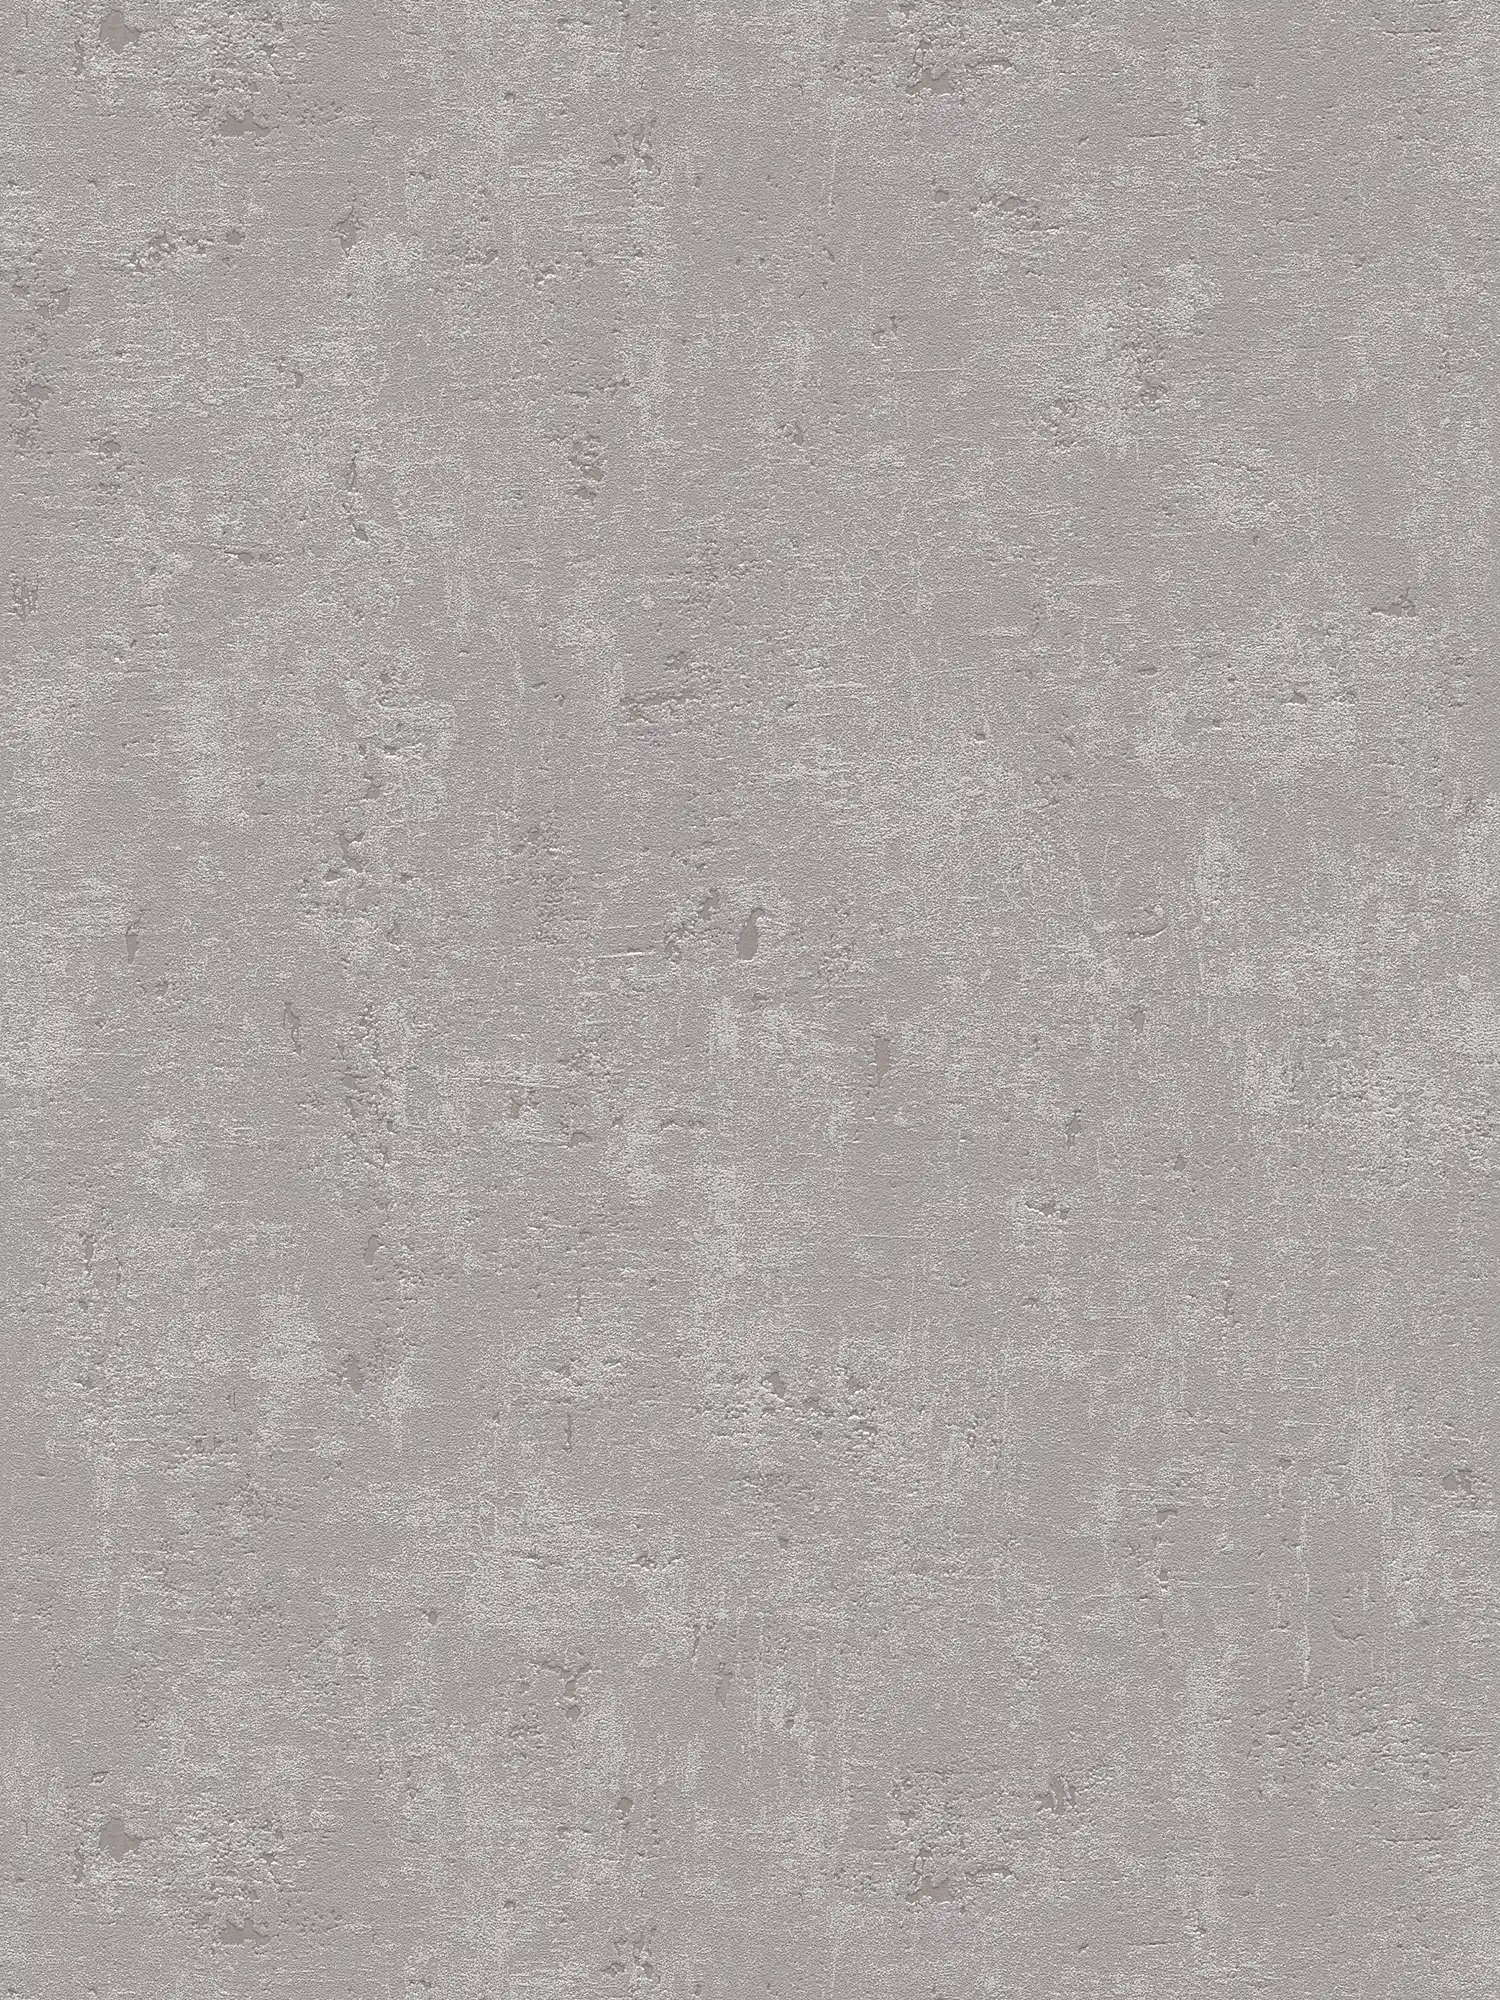         Concrete look wallpaper rustic grey with surface texture
    